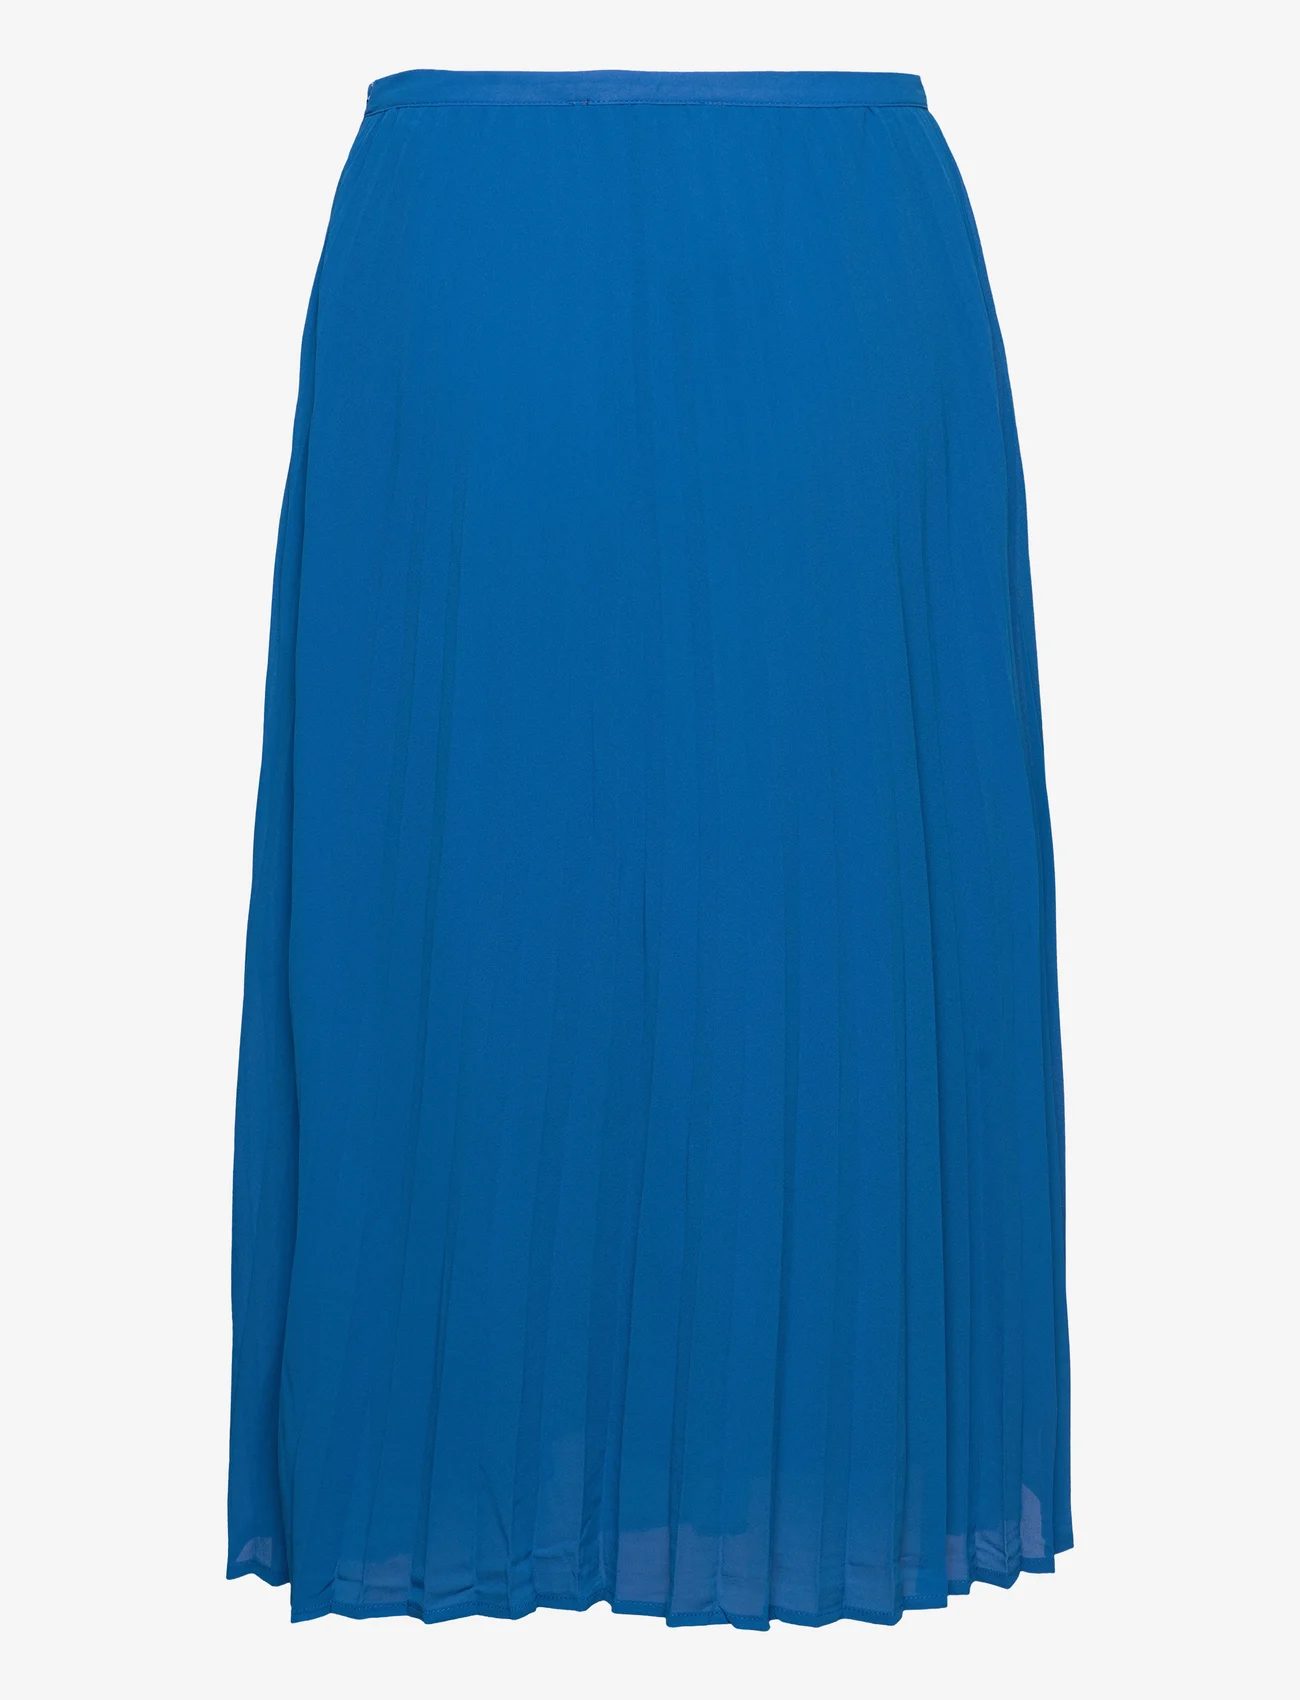 French Connection - PLEAT - midi nederdele - bright blue - 1